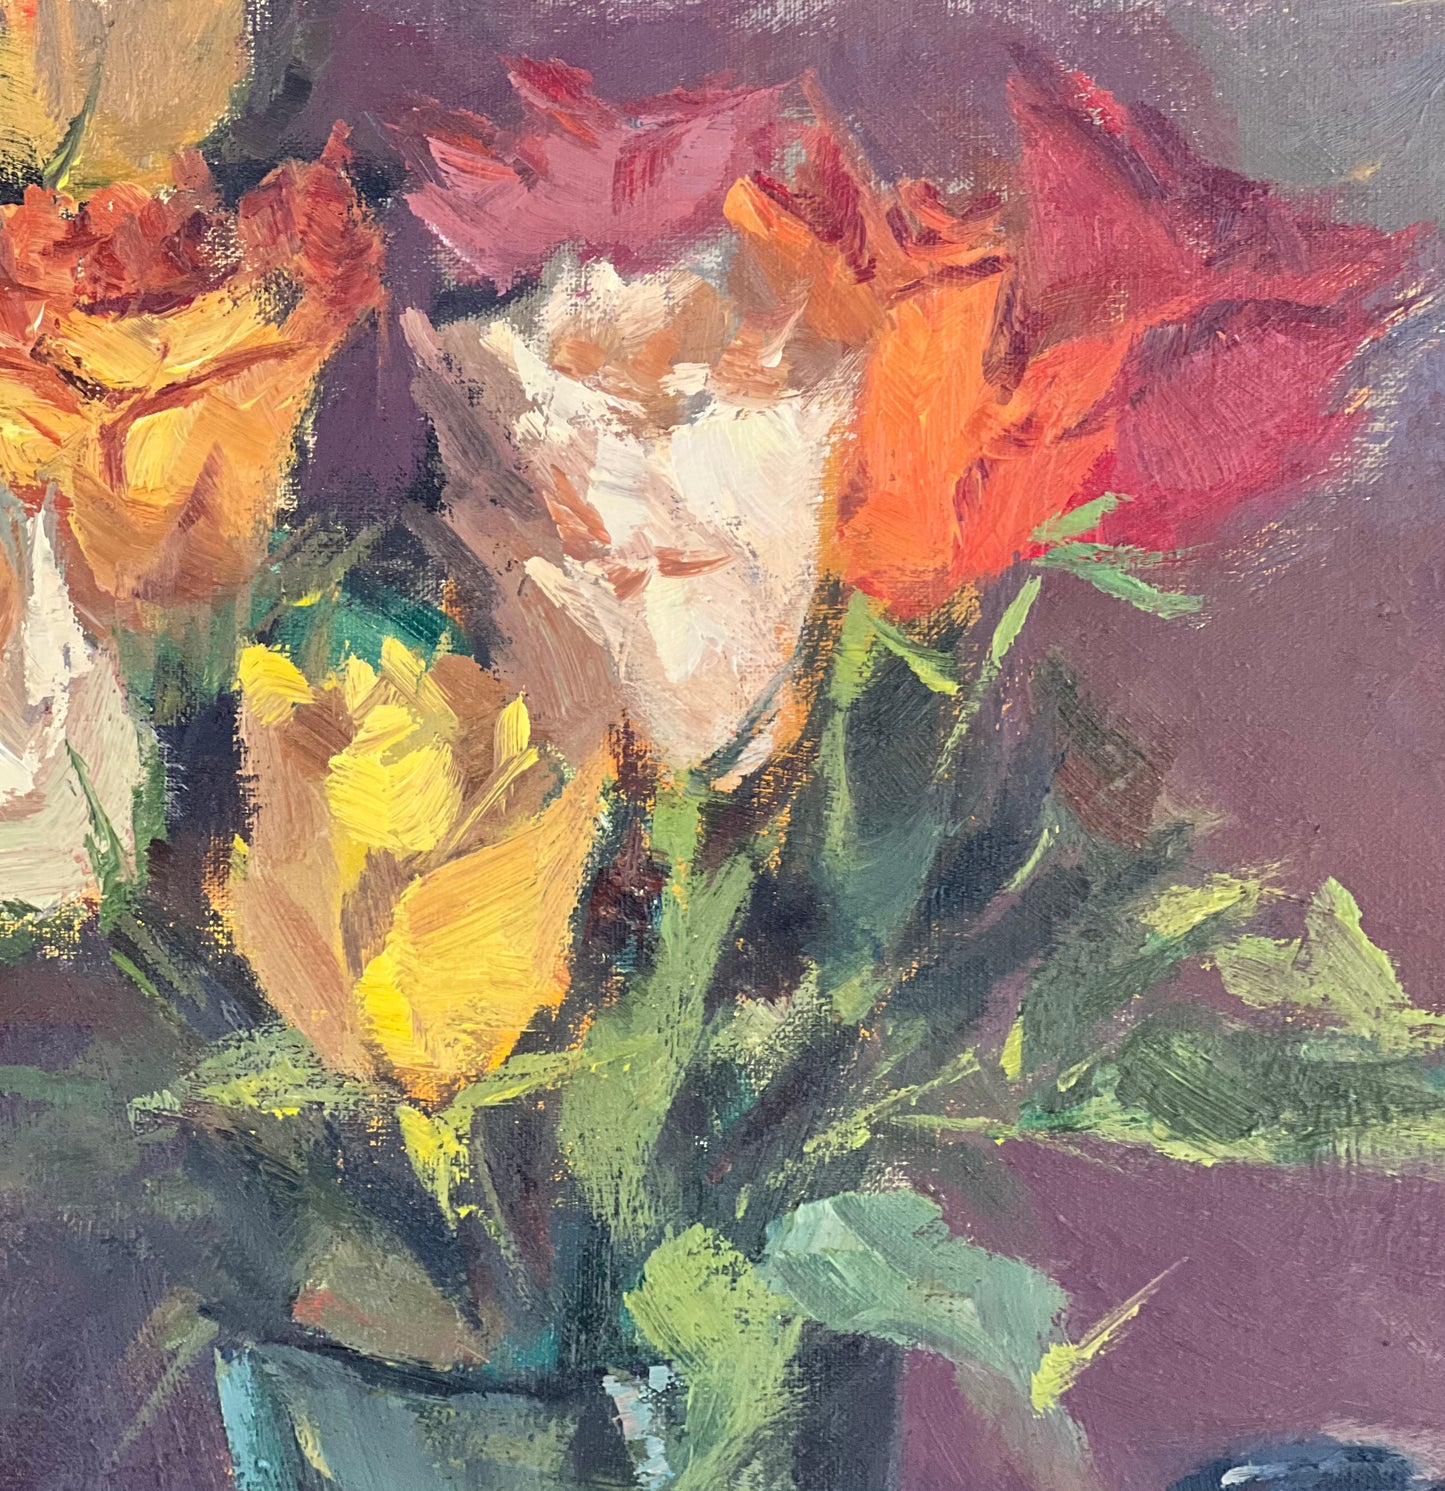 Large Oil Painting of Roses - Roses and Persimmons!